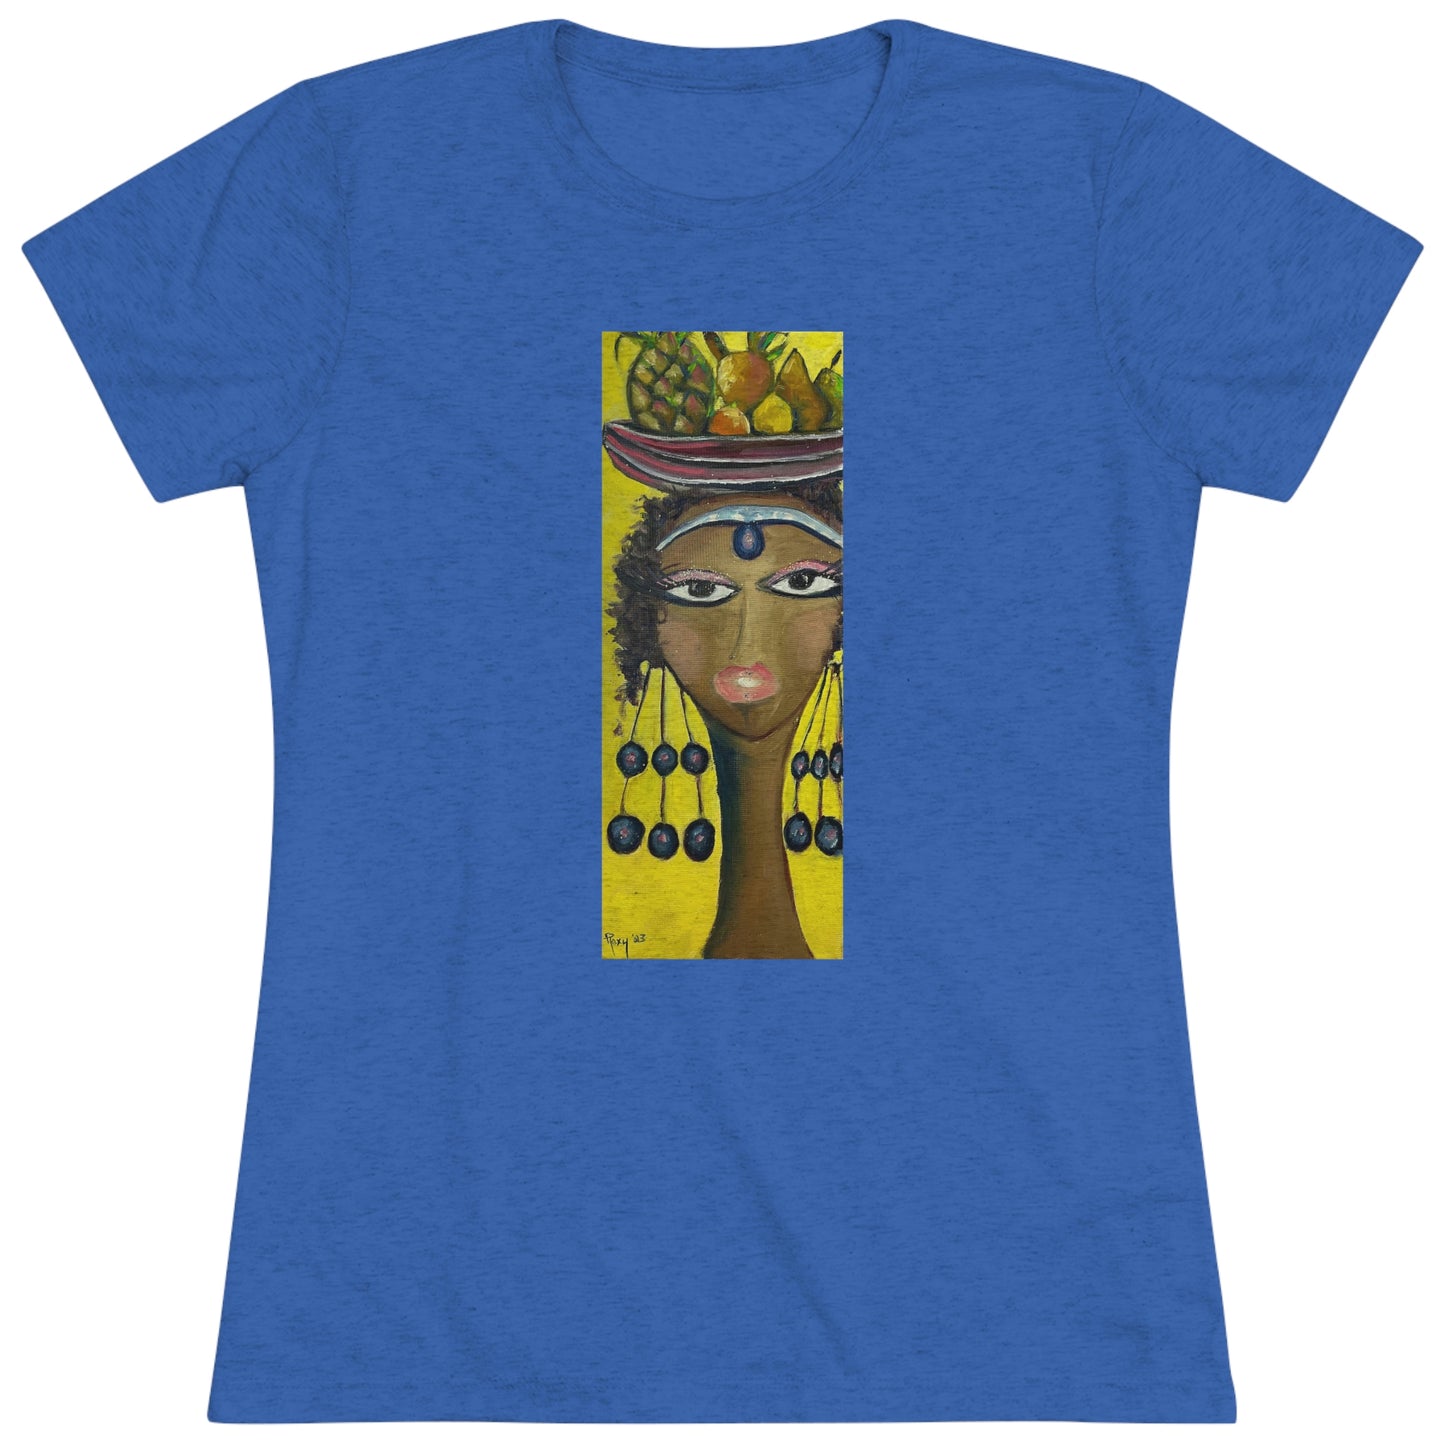 Princess Amahle (image on front) Women's fitted Triblend Tee  tee shirt